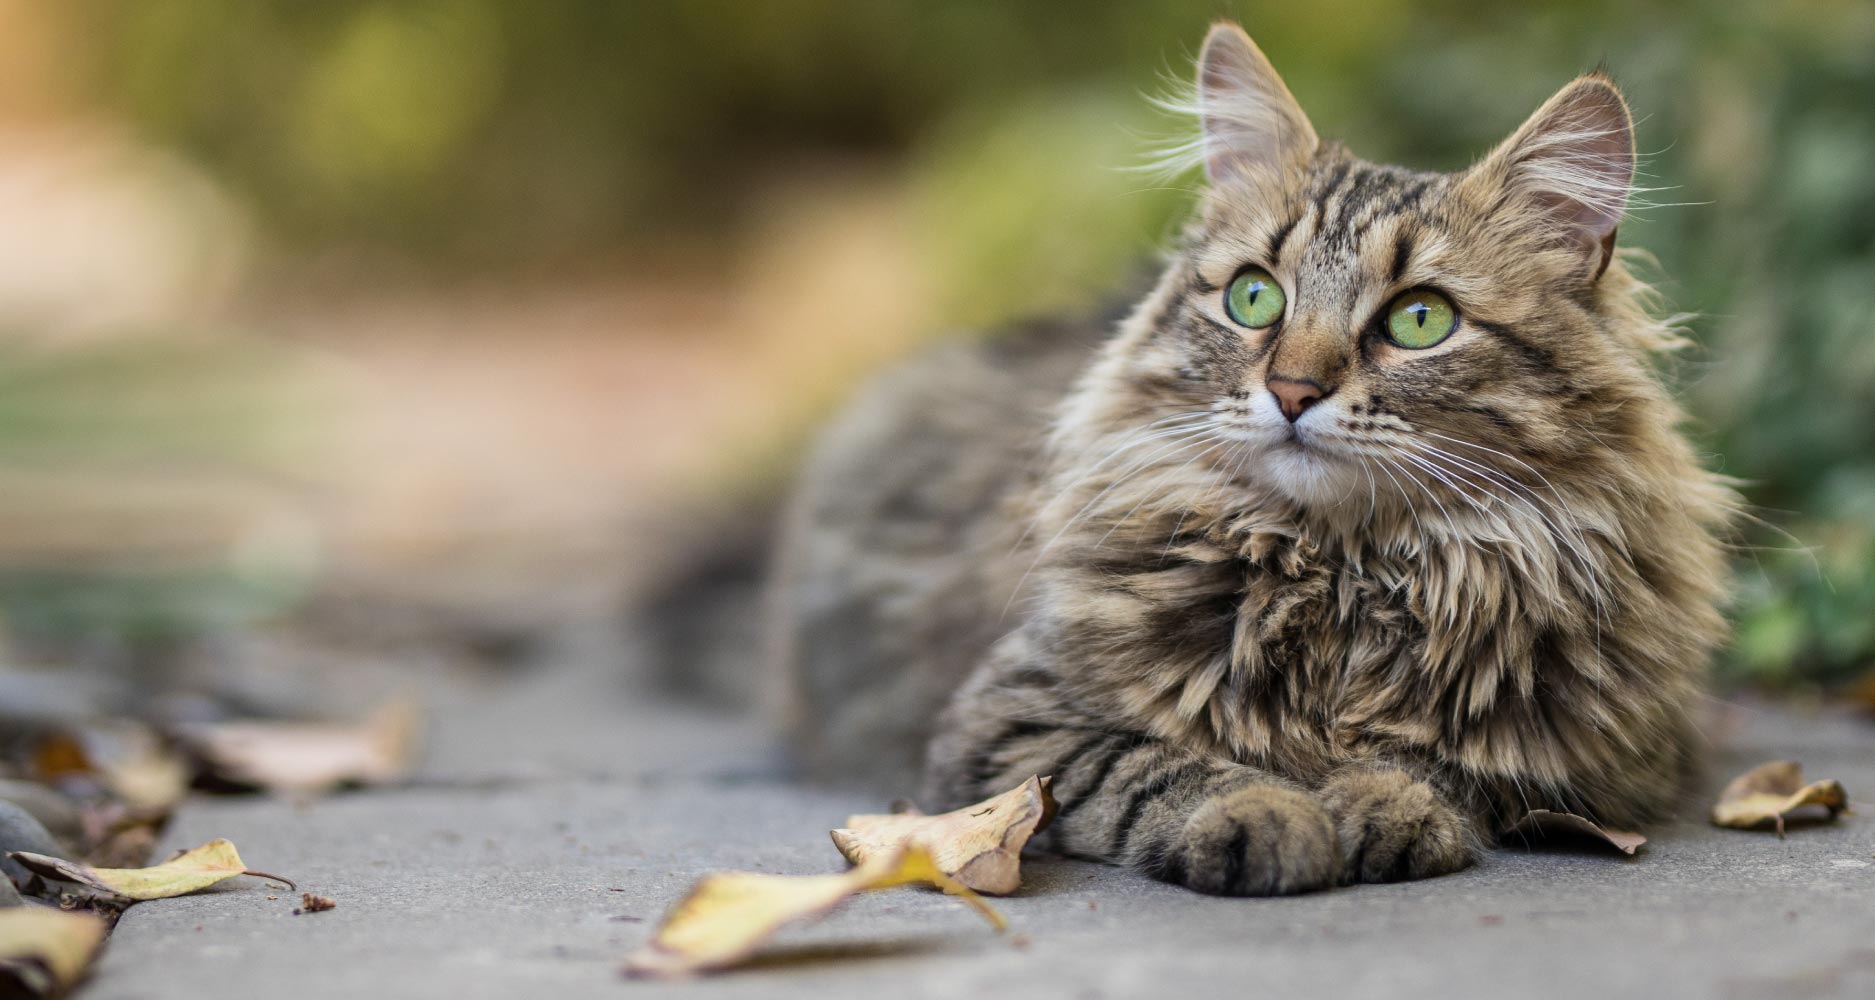 Does Your Cat Have A Healthy Coat & Skin? - PetlifeSA